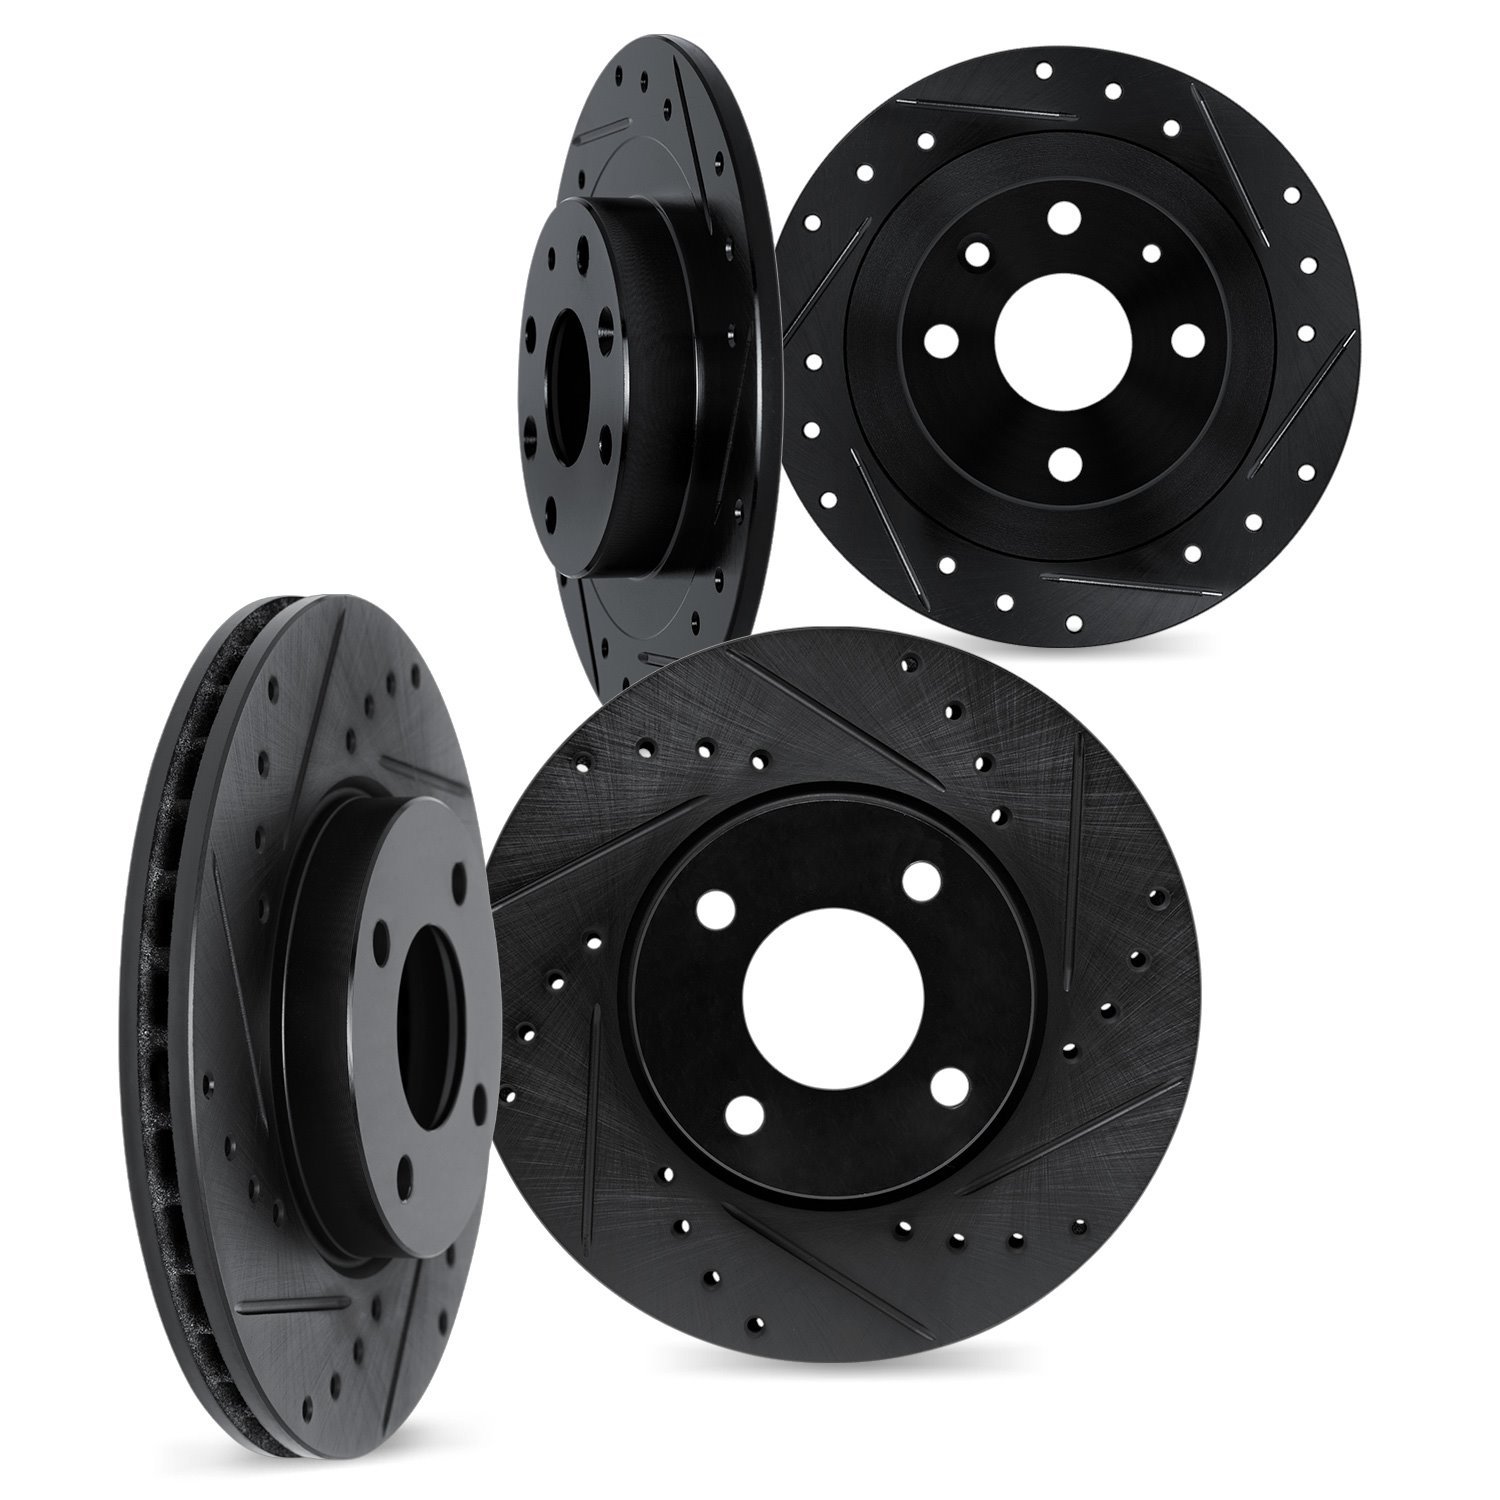 8004-92051 Drilled/Slotted Brake Rotors [Black], 2013-2017 Suzuki, Position: Front and Rear